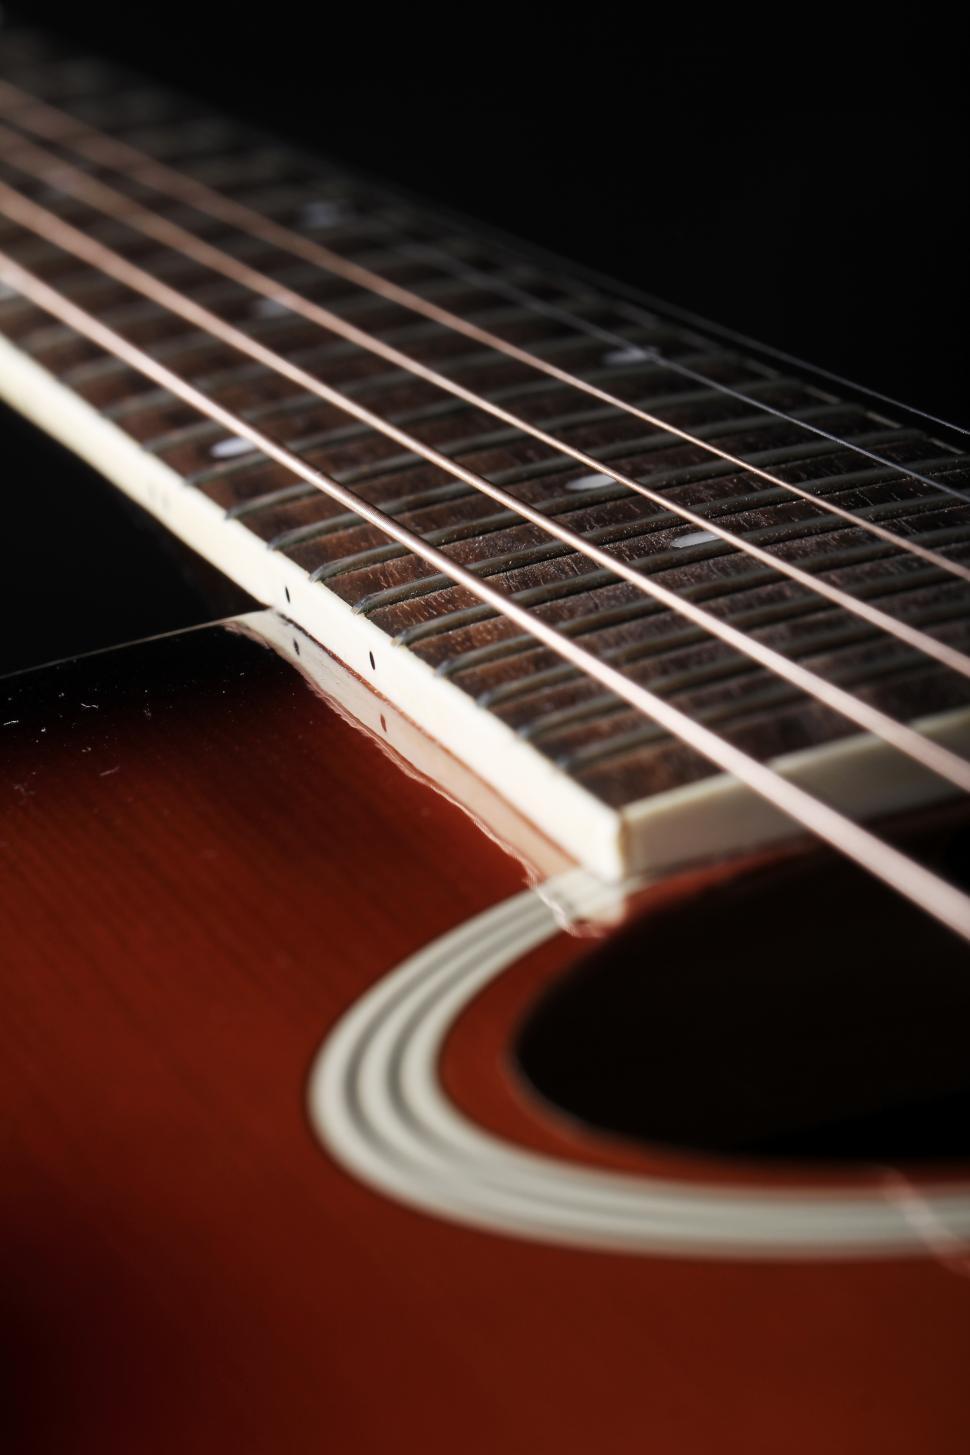 Free Image of Strings of an acoustic guitar 